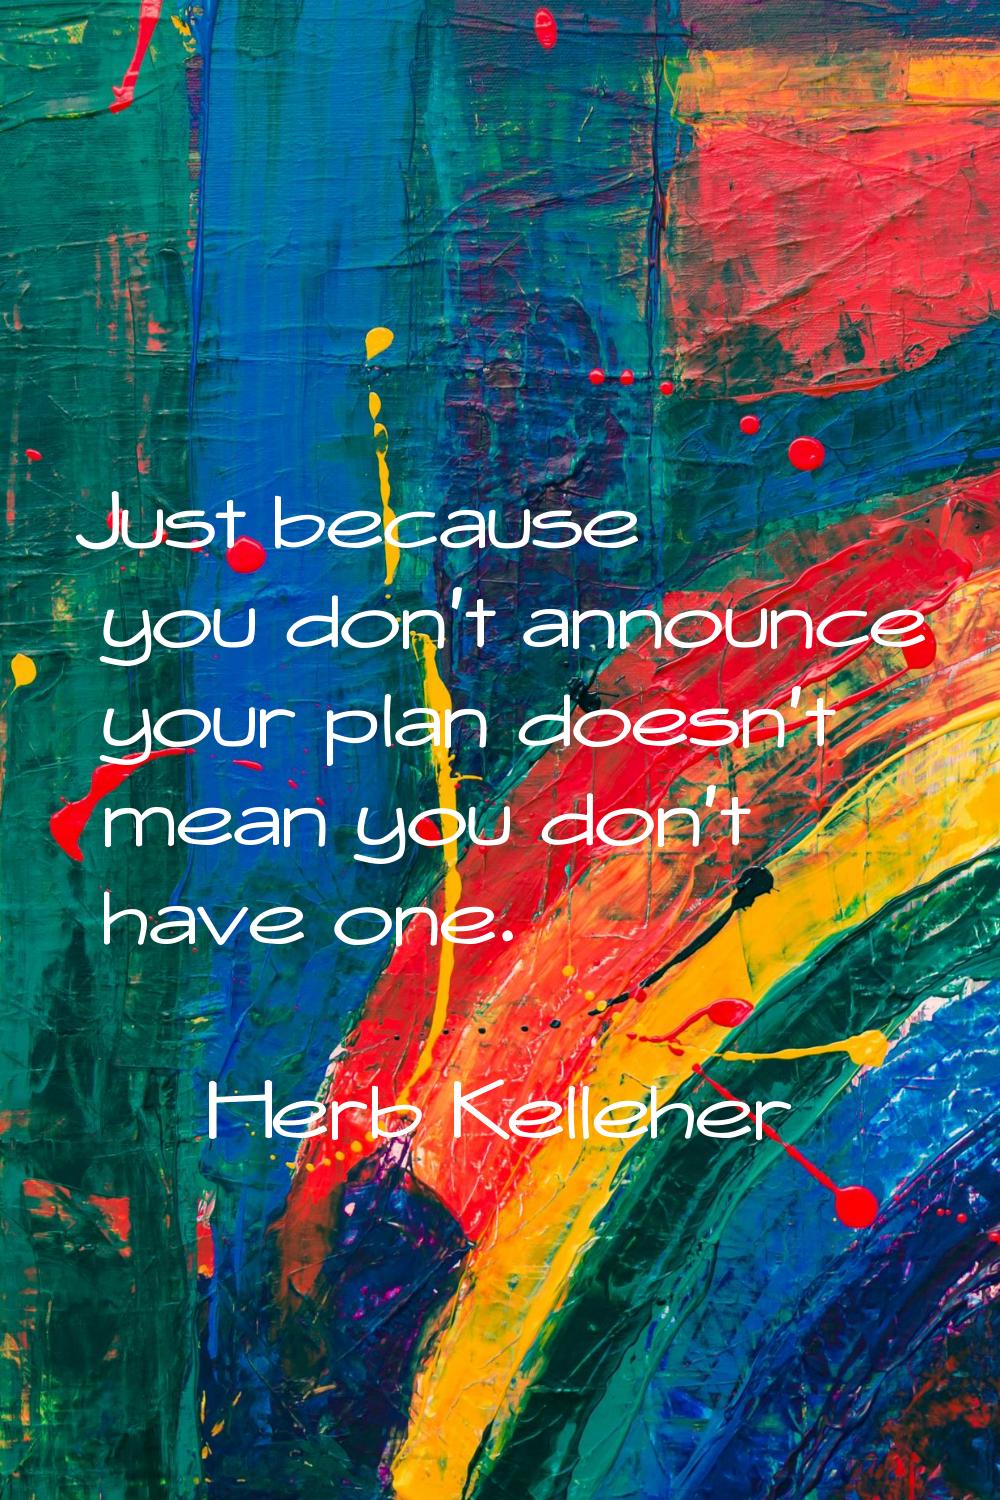 Just because you don't announce your plan doesn't mean you don't have one.